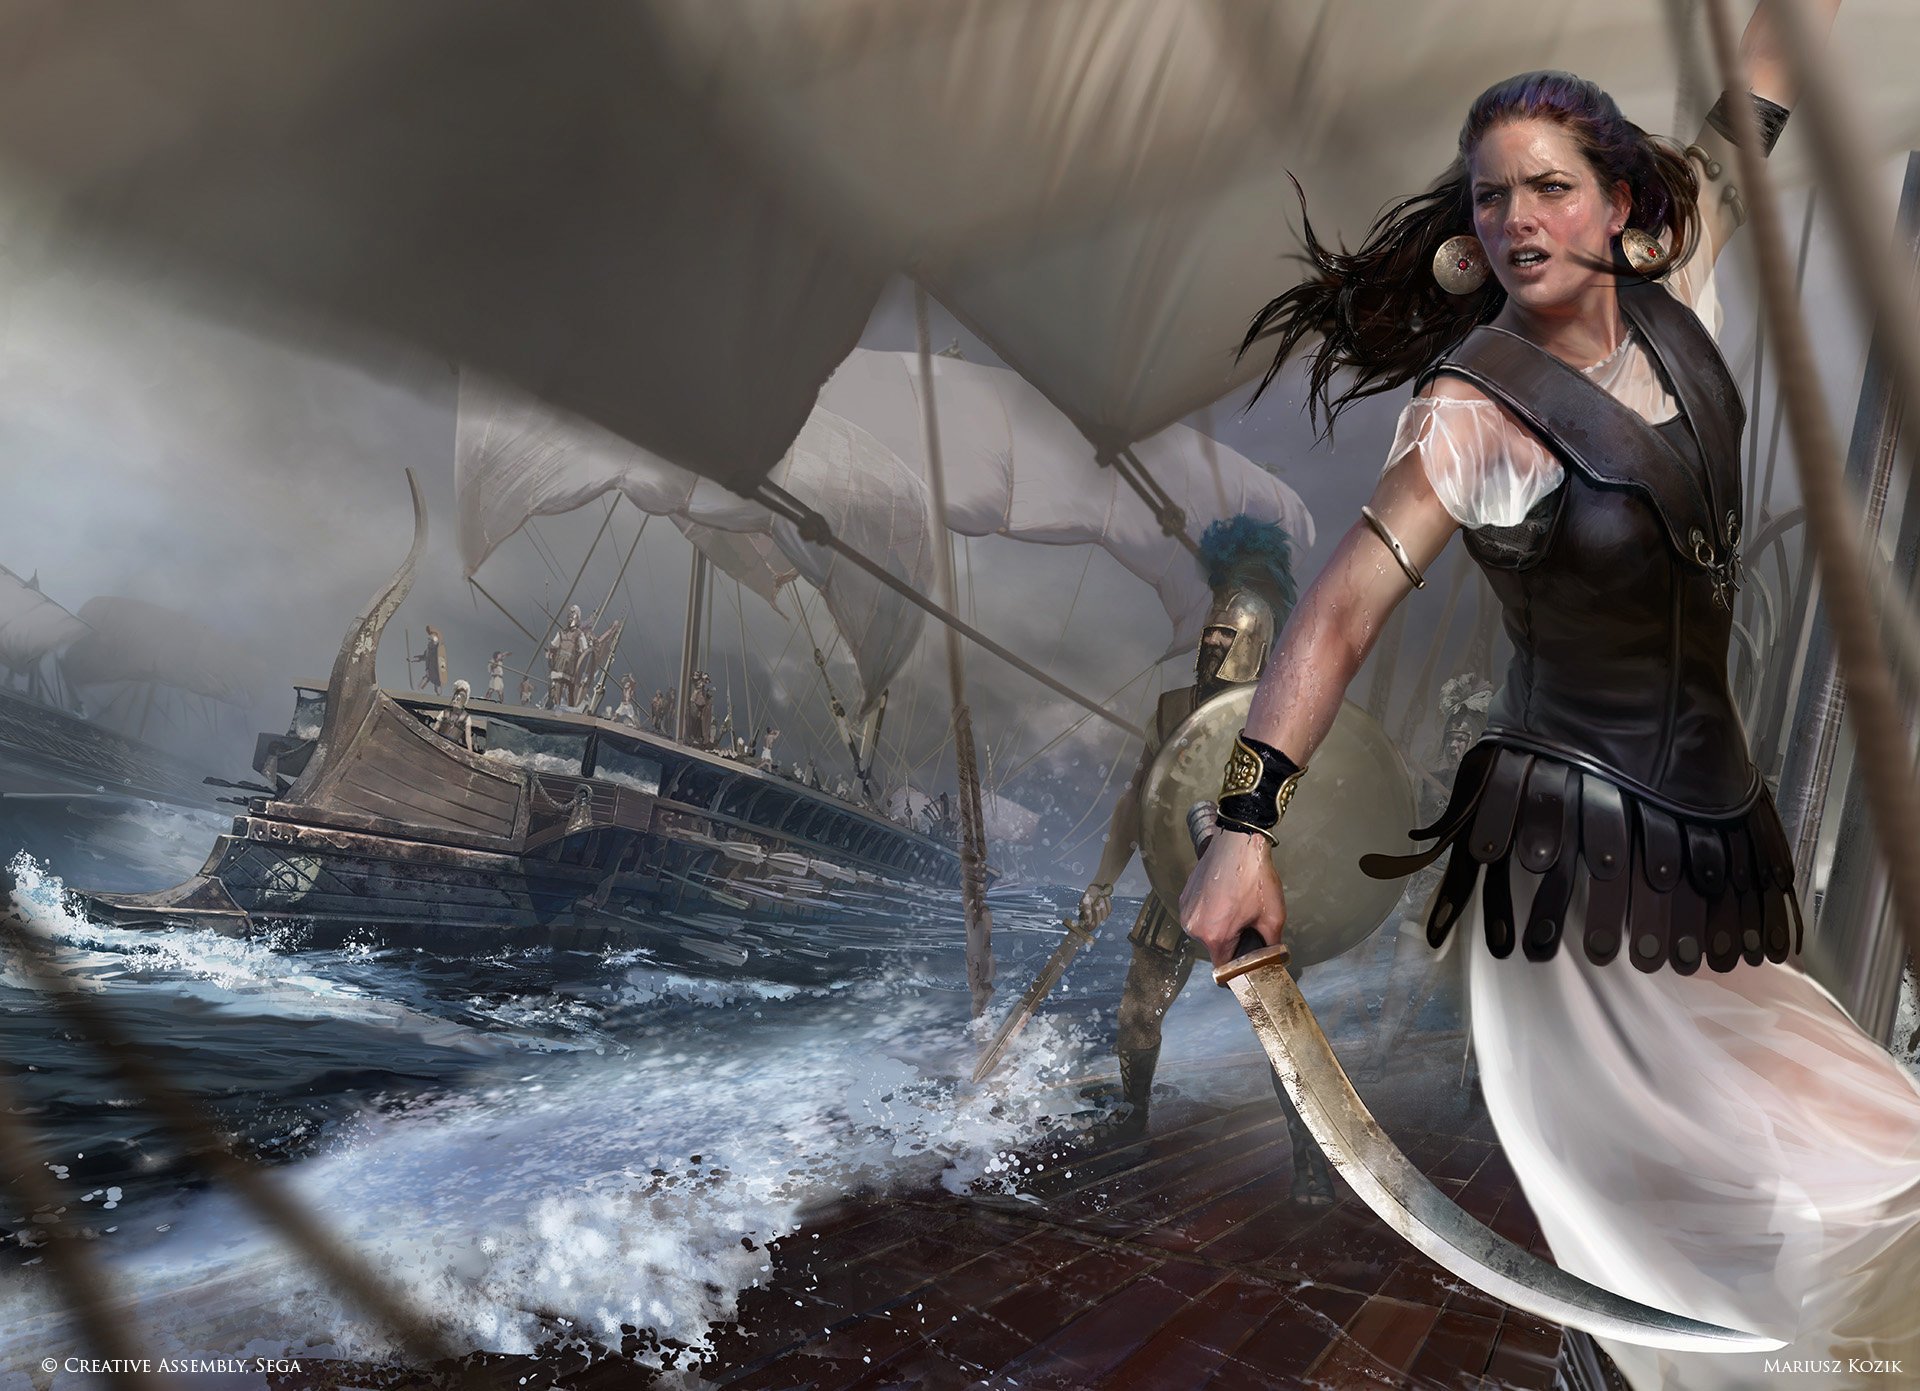 Modern artistic depiction of woman warrior Queen Teuta as she appears in the historical title: "Total War: Rome 2" 